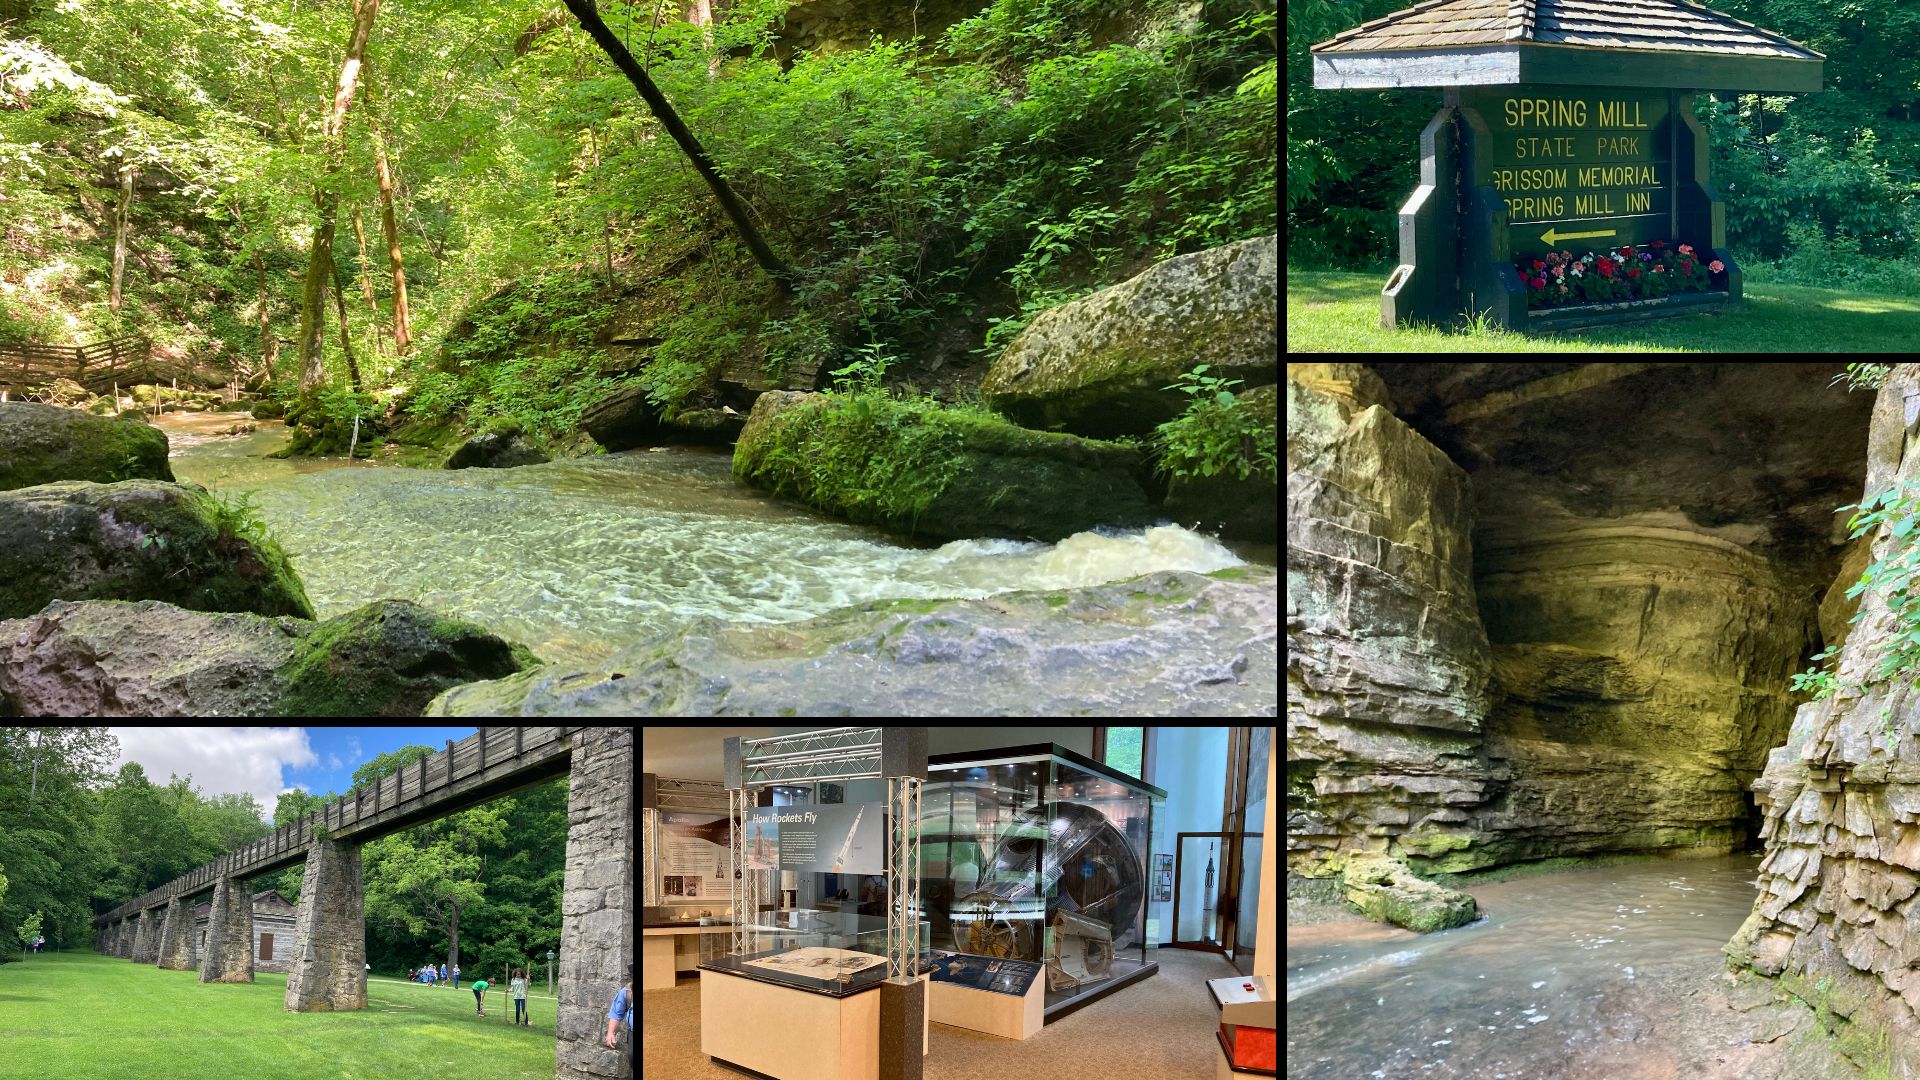 A collage of photos of a cave, river, pioneer town, space craft, and "Spring Mill" sign